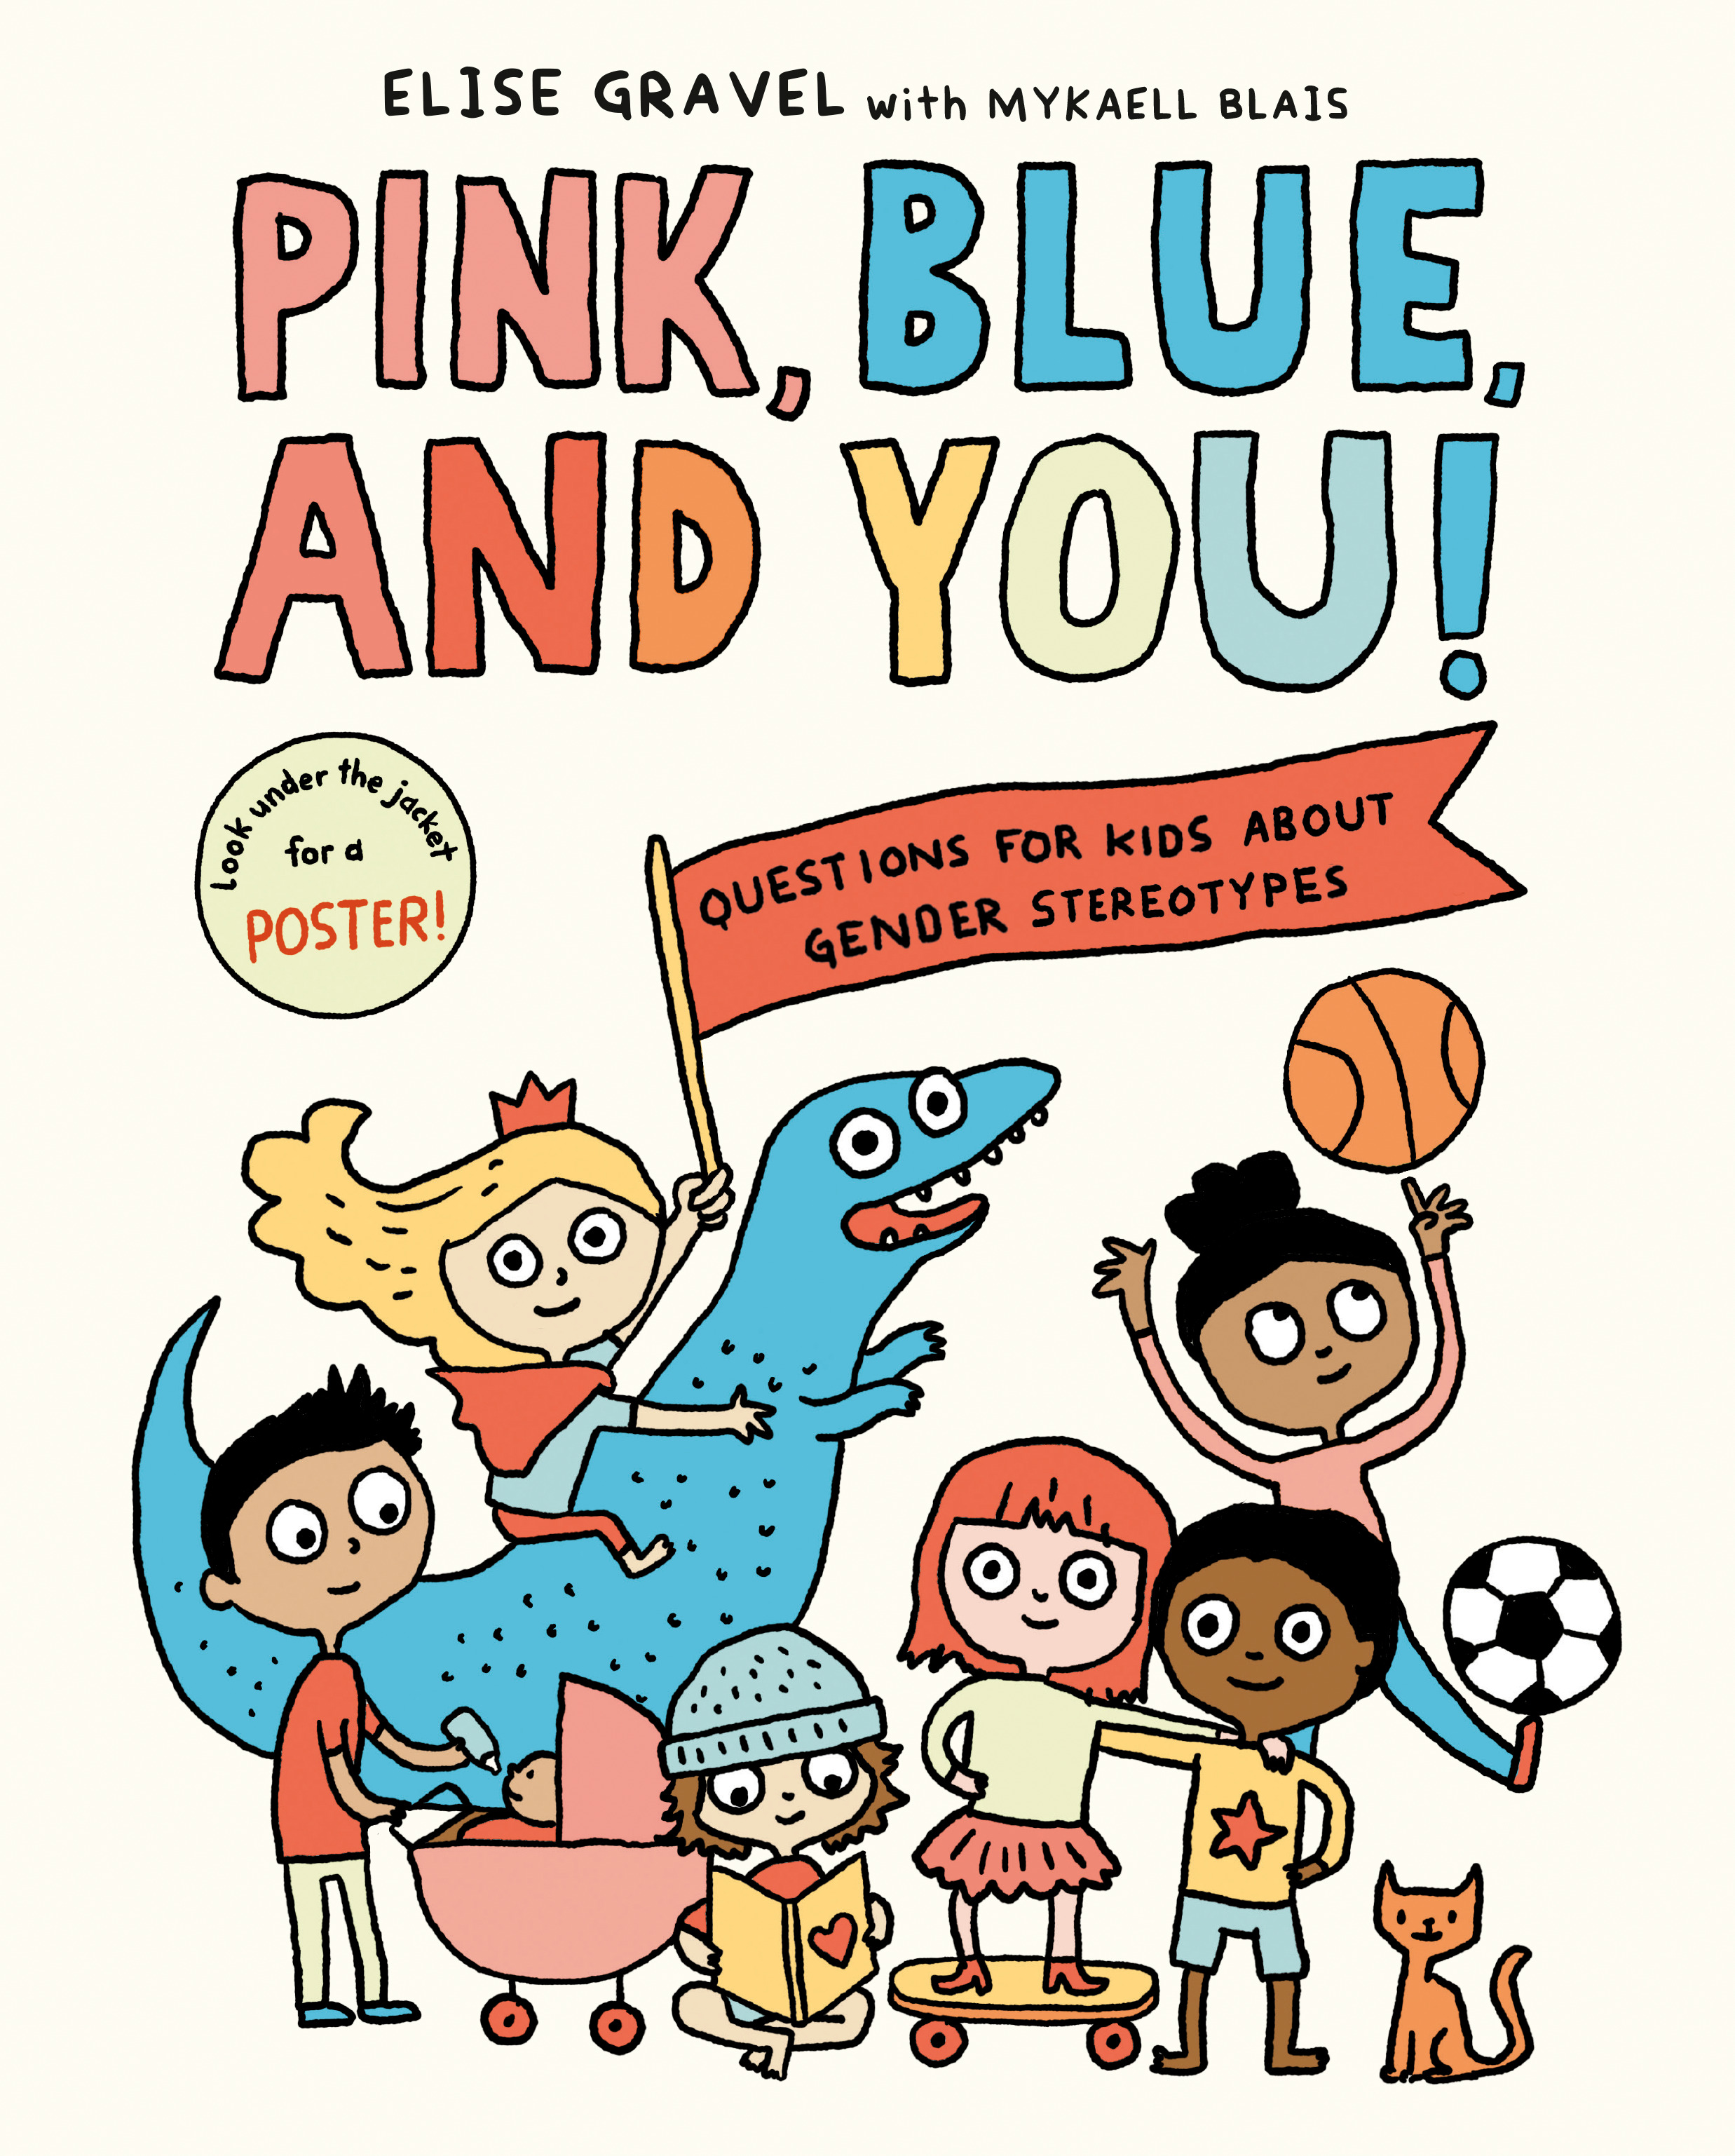 Pink, Blue, and You! : Questions for Kids about Gender Stereotypes | Gravel, Elise